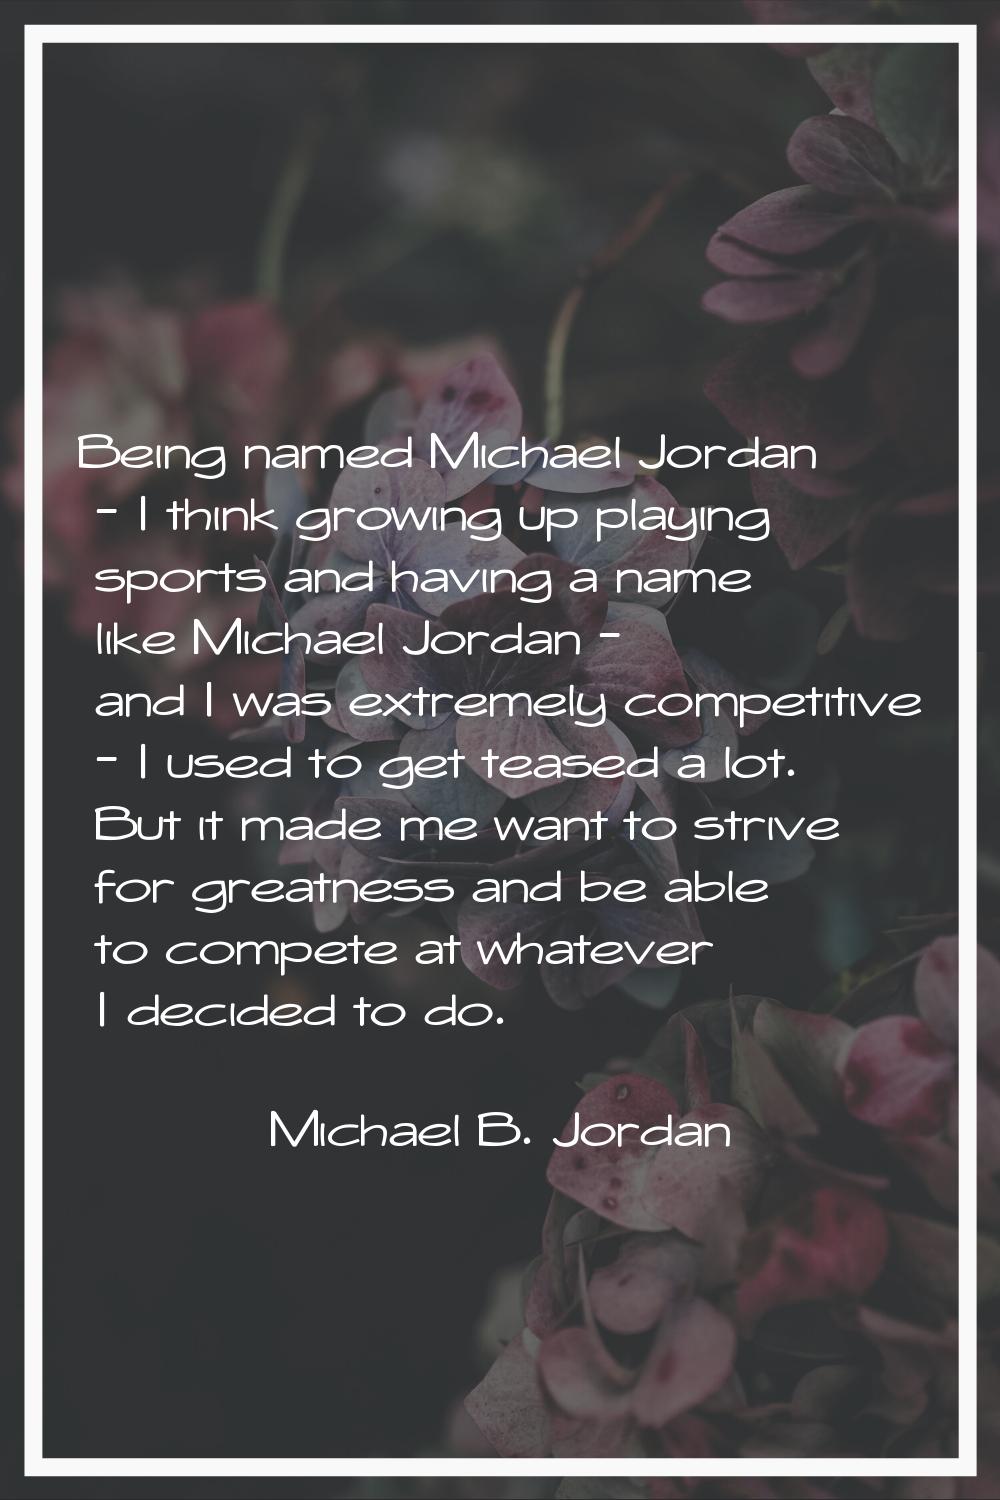 Being named Michael Jordan - I think growing up playing sports and having a name like Michael Jorda